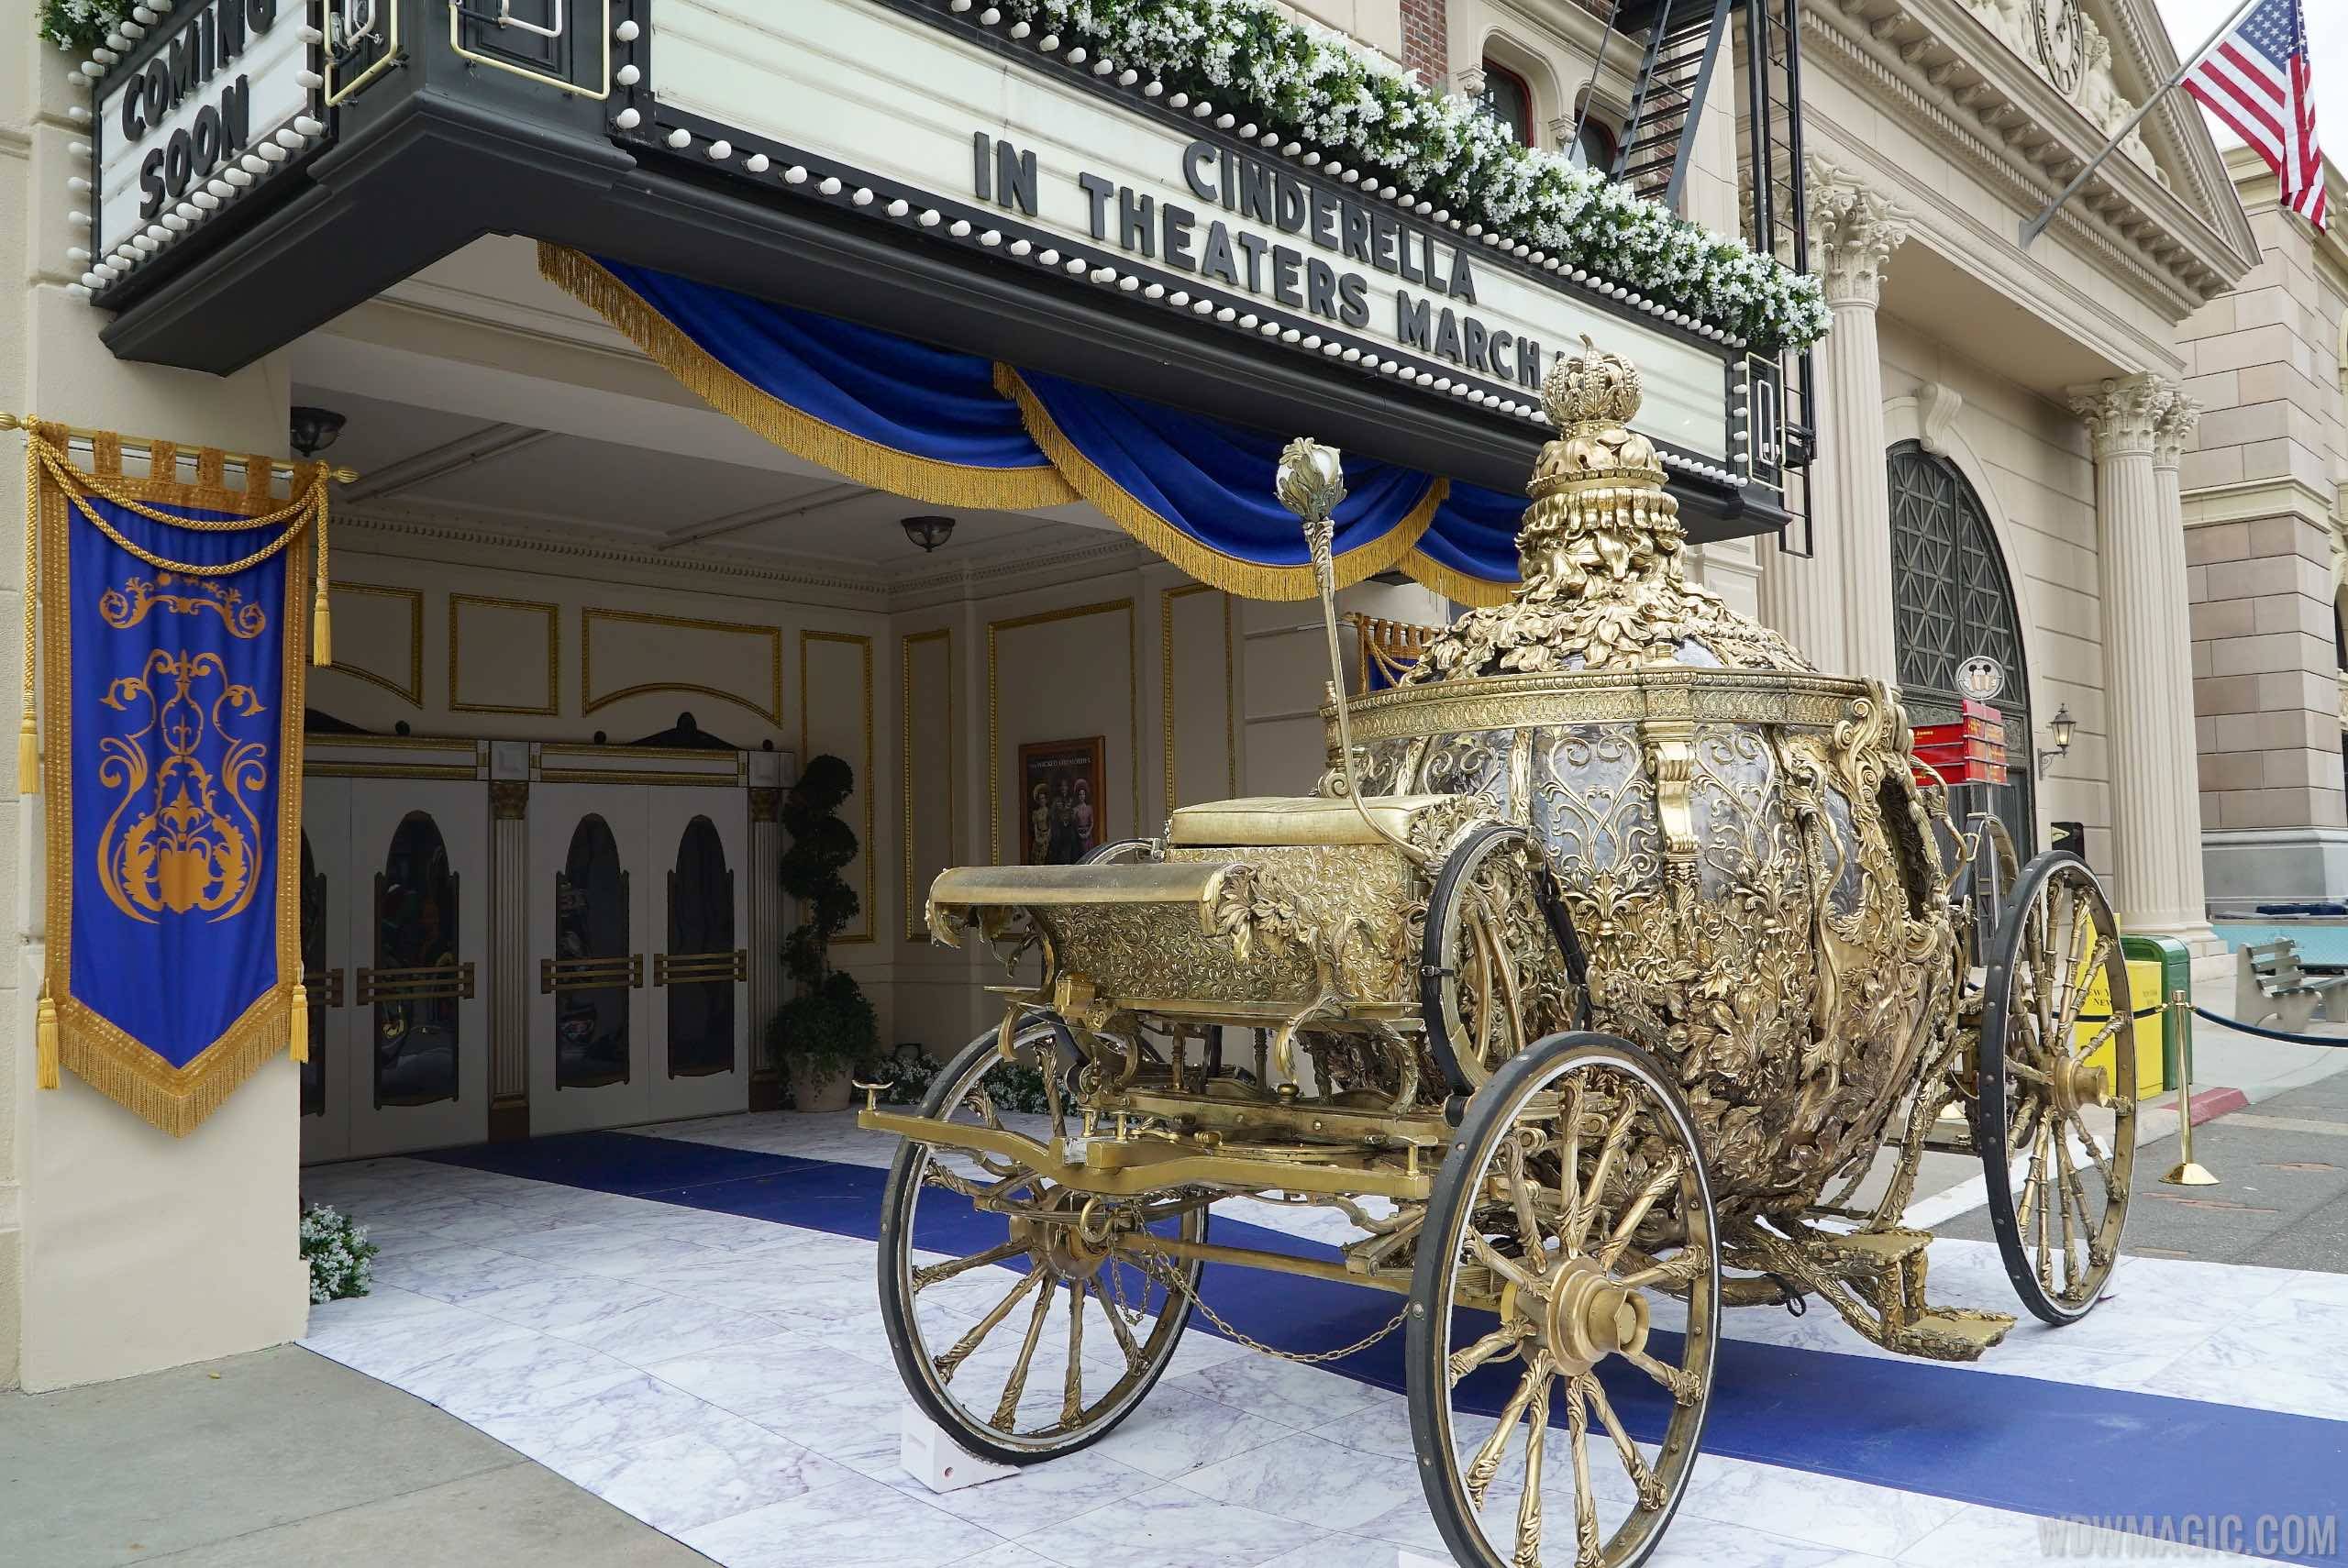 Golden Carriage prop from Cinderella